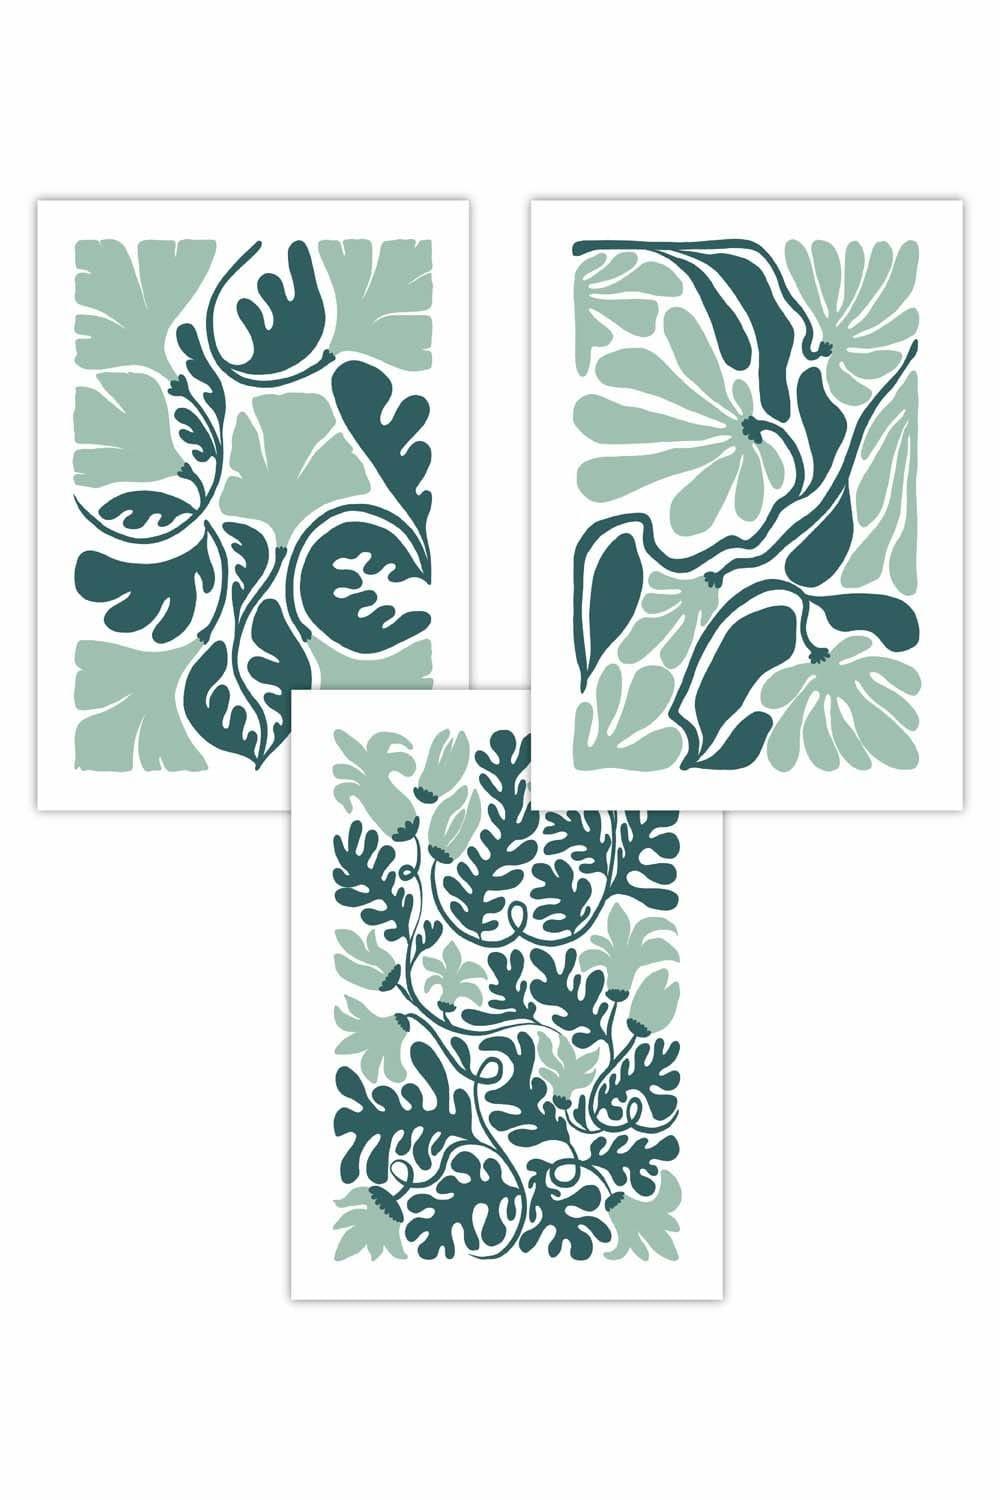 Set of 3 Boho Abstract Green and White Floral Art Posters